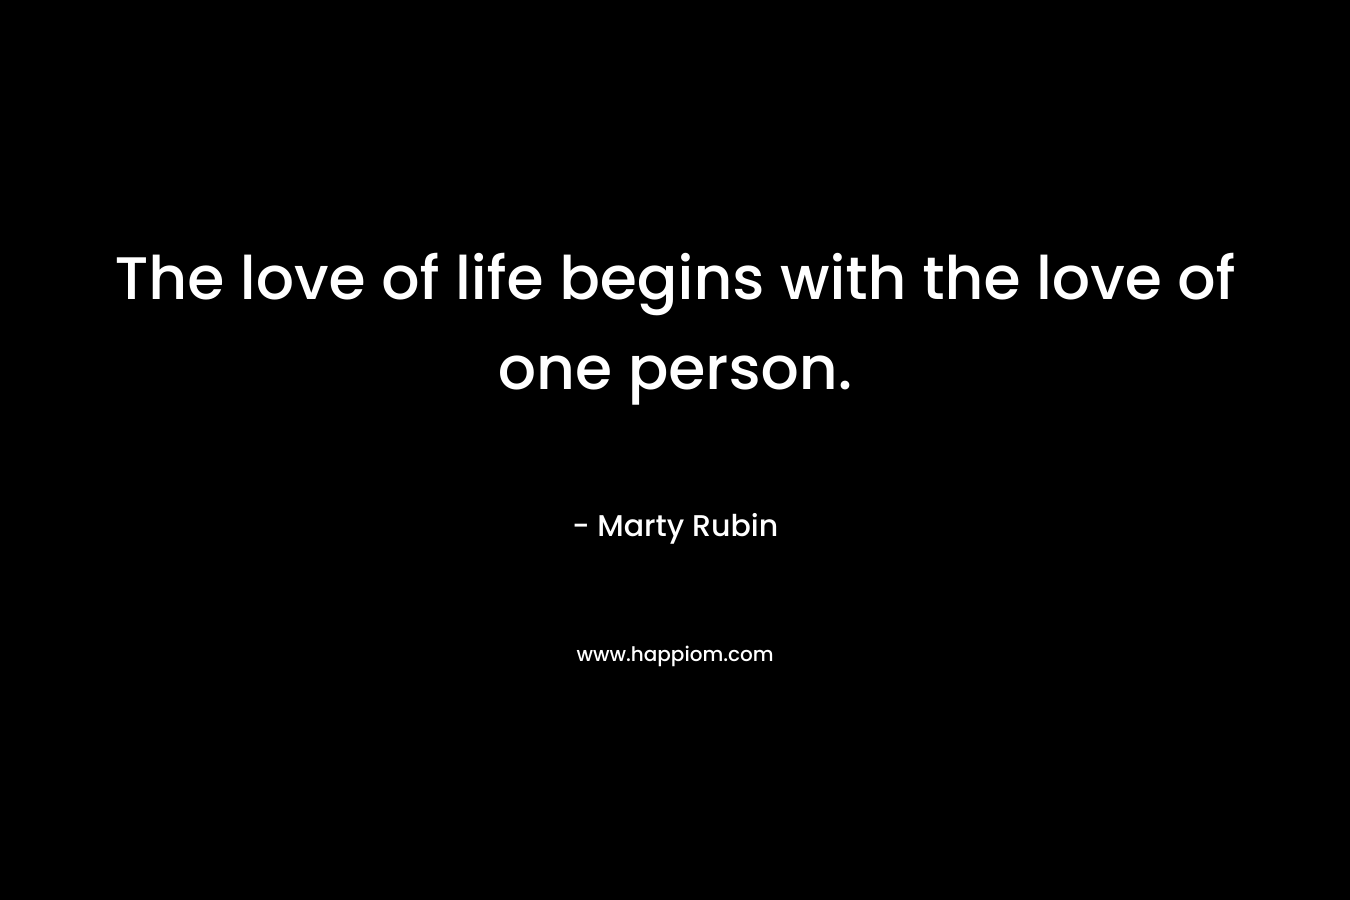 The love of life begins with the love of one person. – Marty Rubin